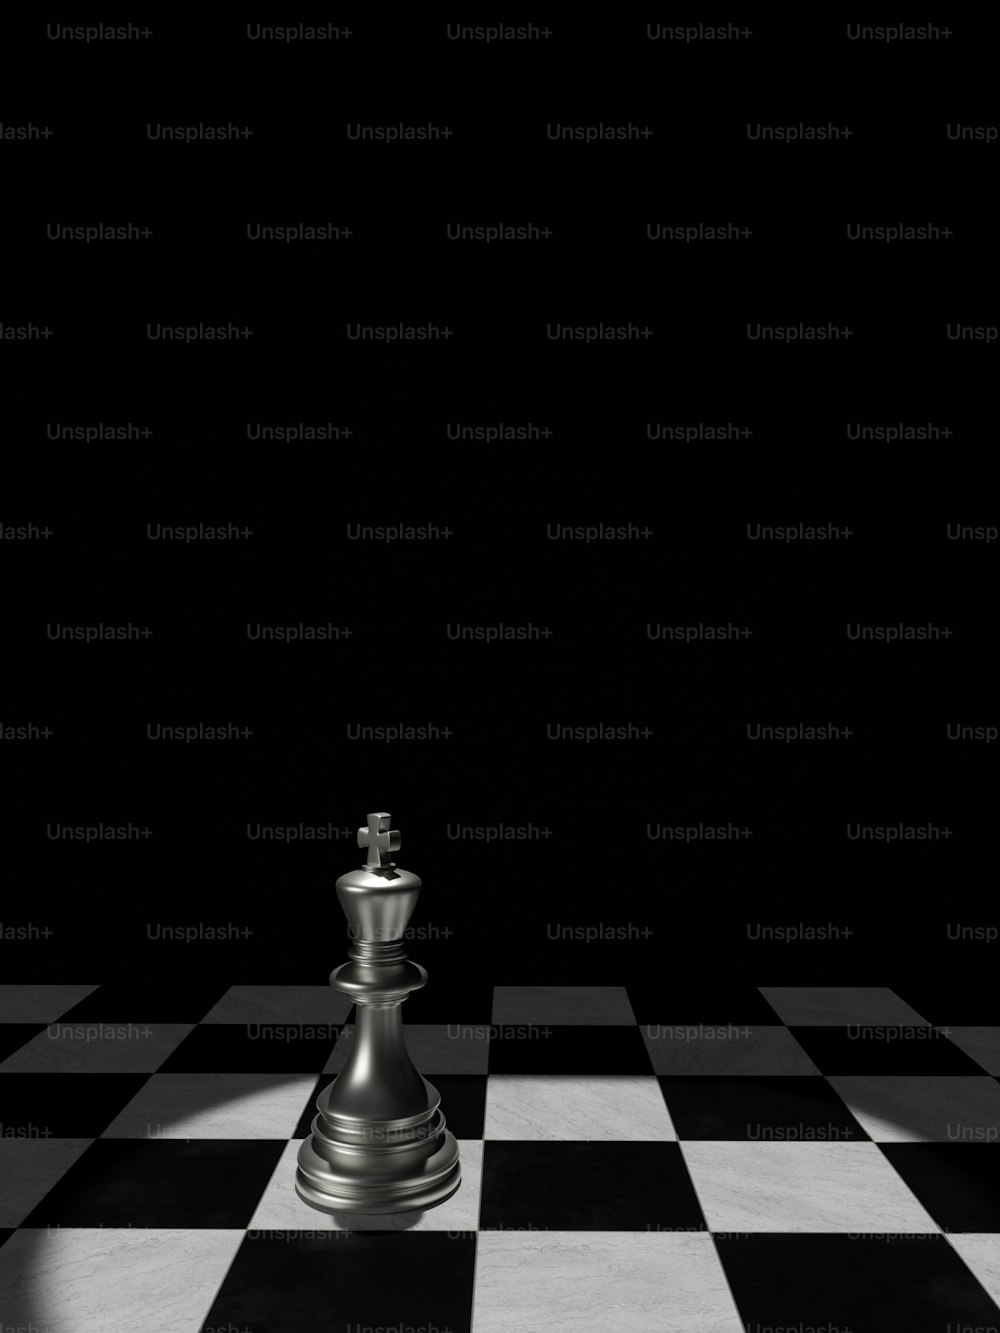 White Chess King Among Lying Down Black Pawns On Chessboard High-Res Stock  Photo - Getty Images